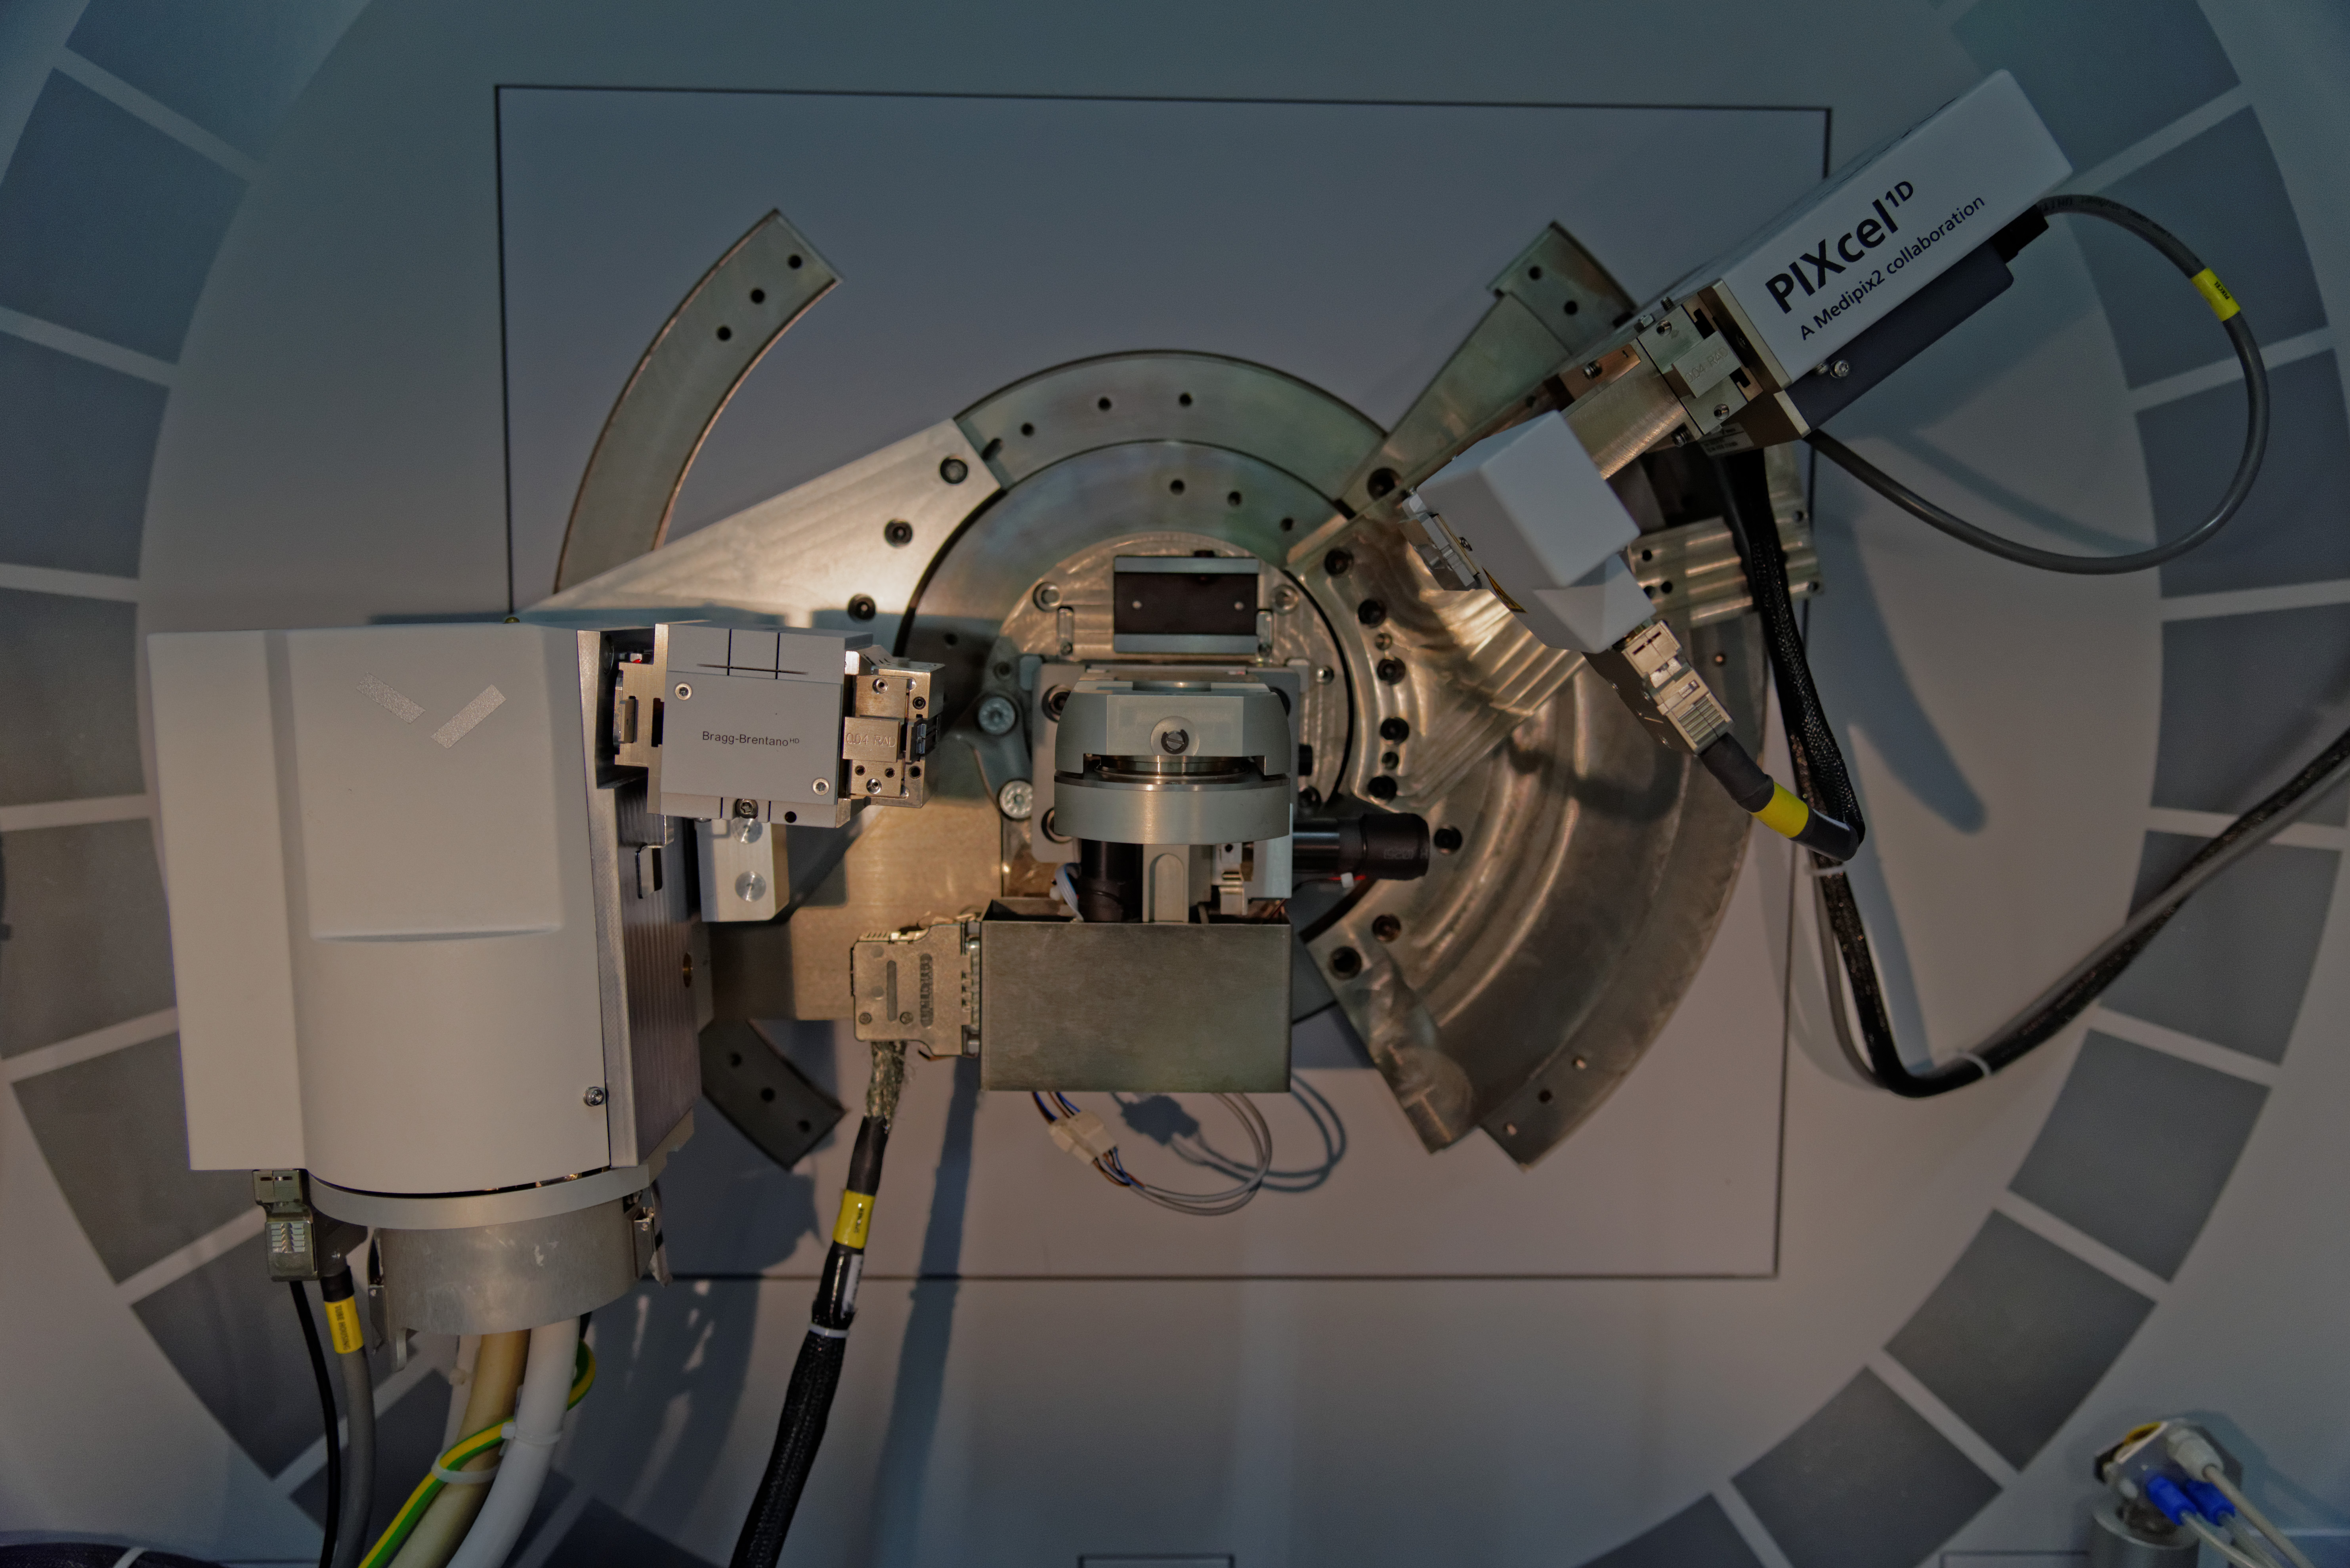 Details of the x-ray diffractometer